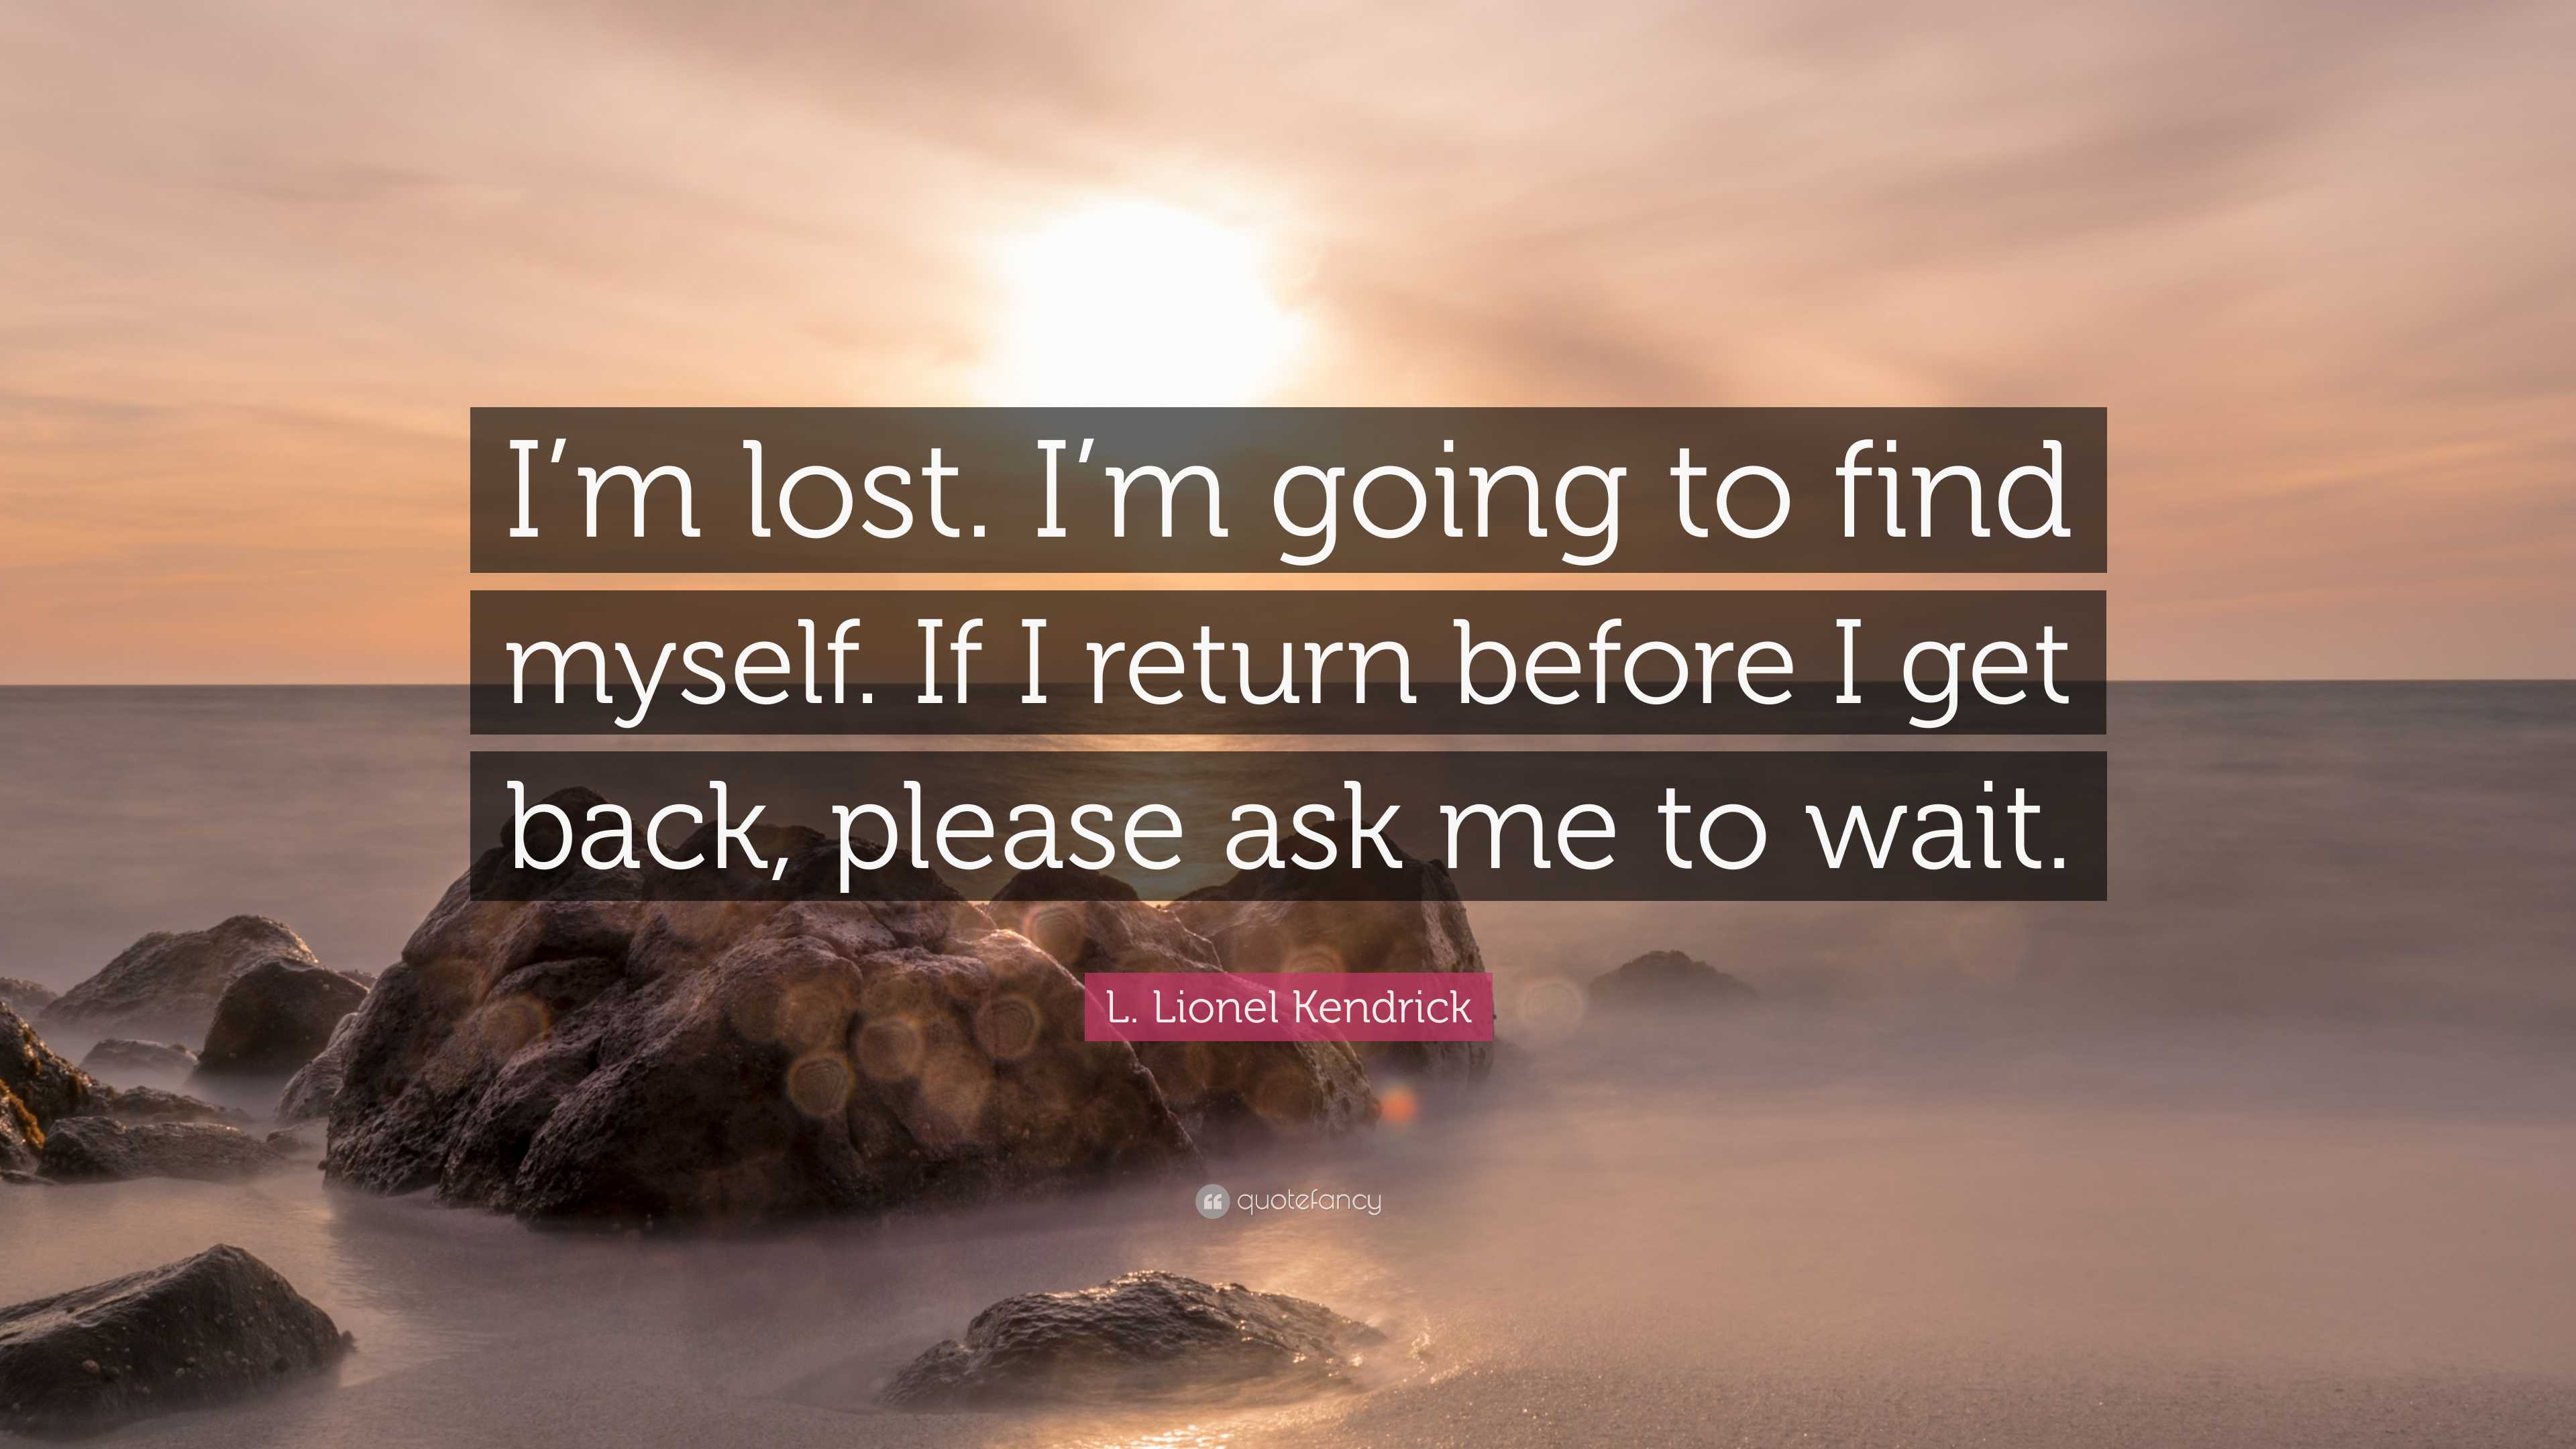 L. Lionel Kendrick Quote: “I'm lost. I'm going to find myself. If I return